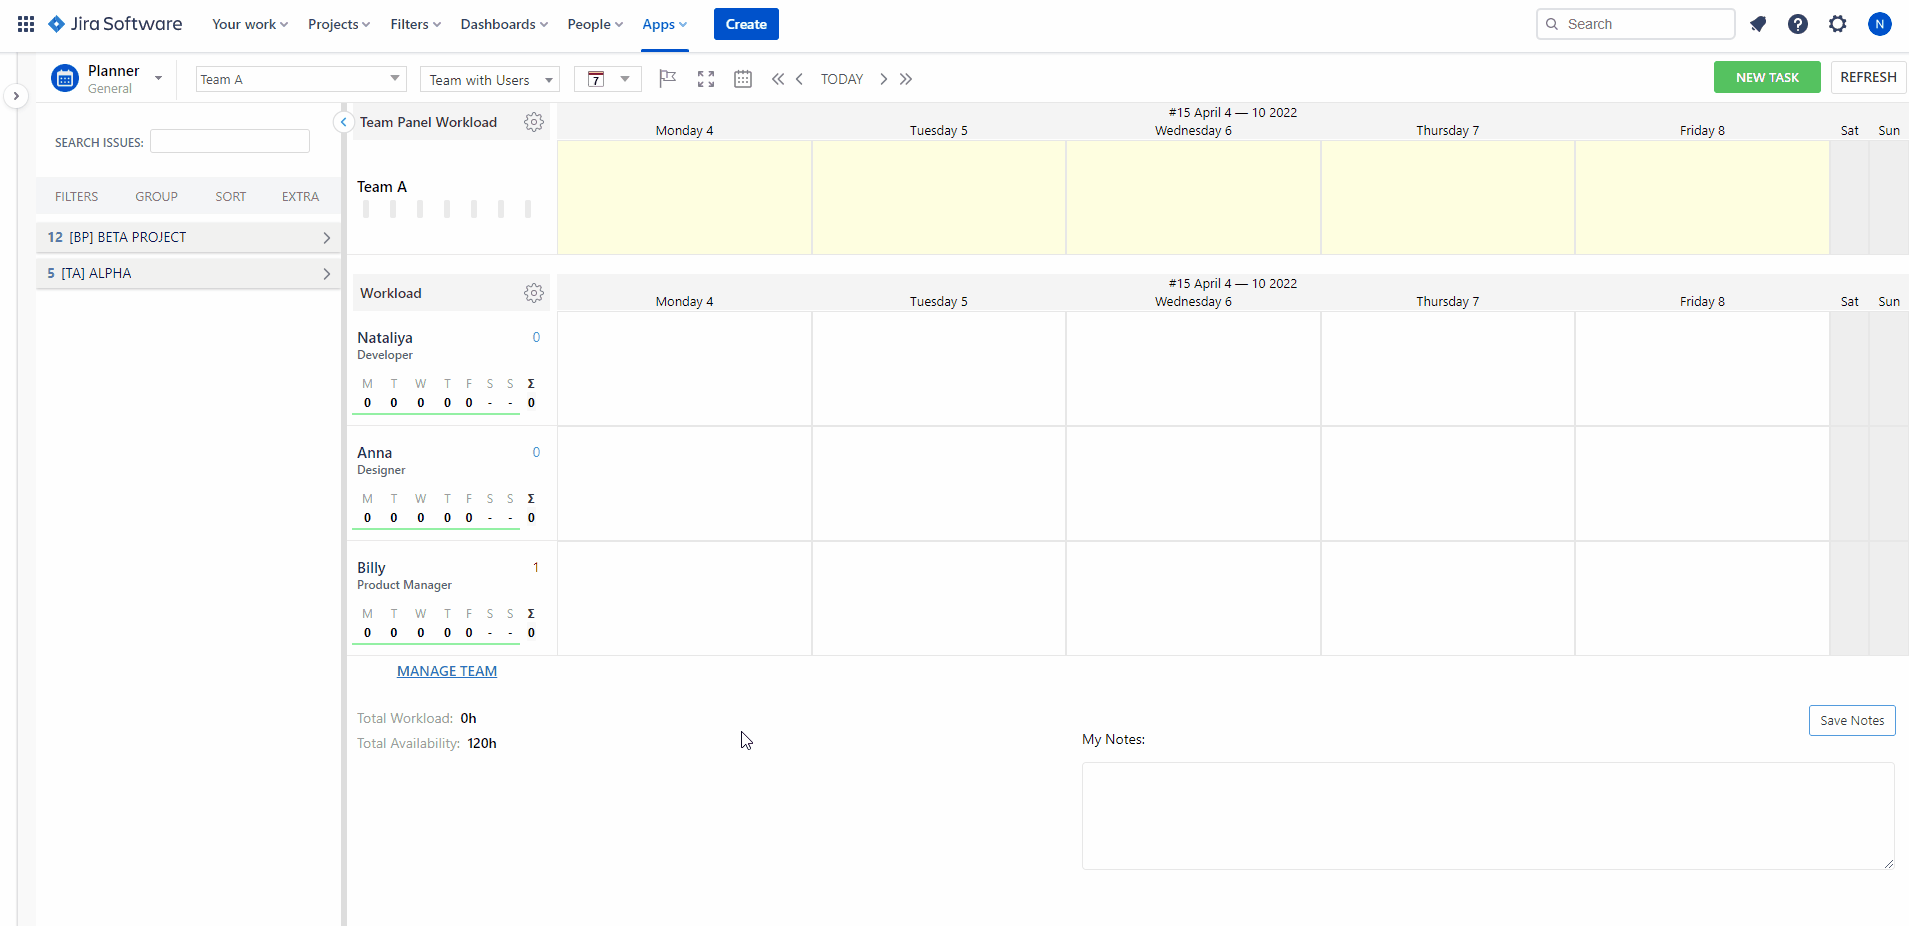 Timeline_overview_scheduling_Jira